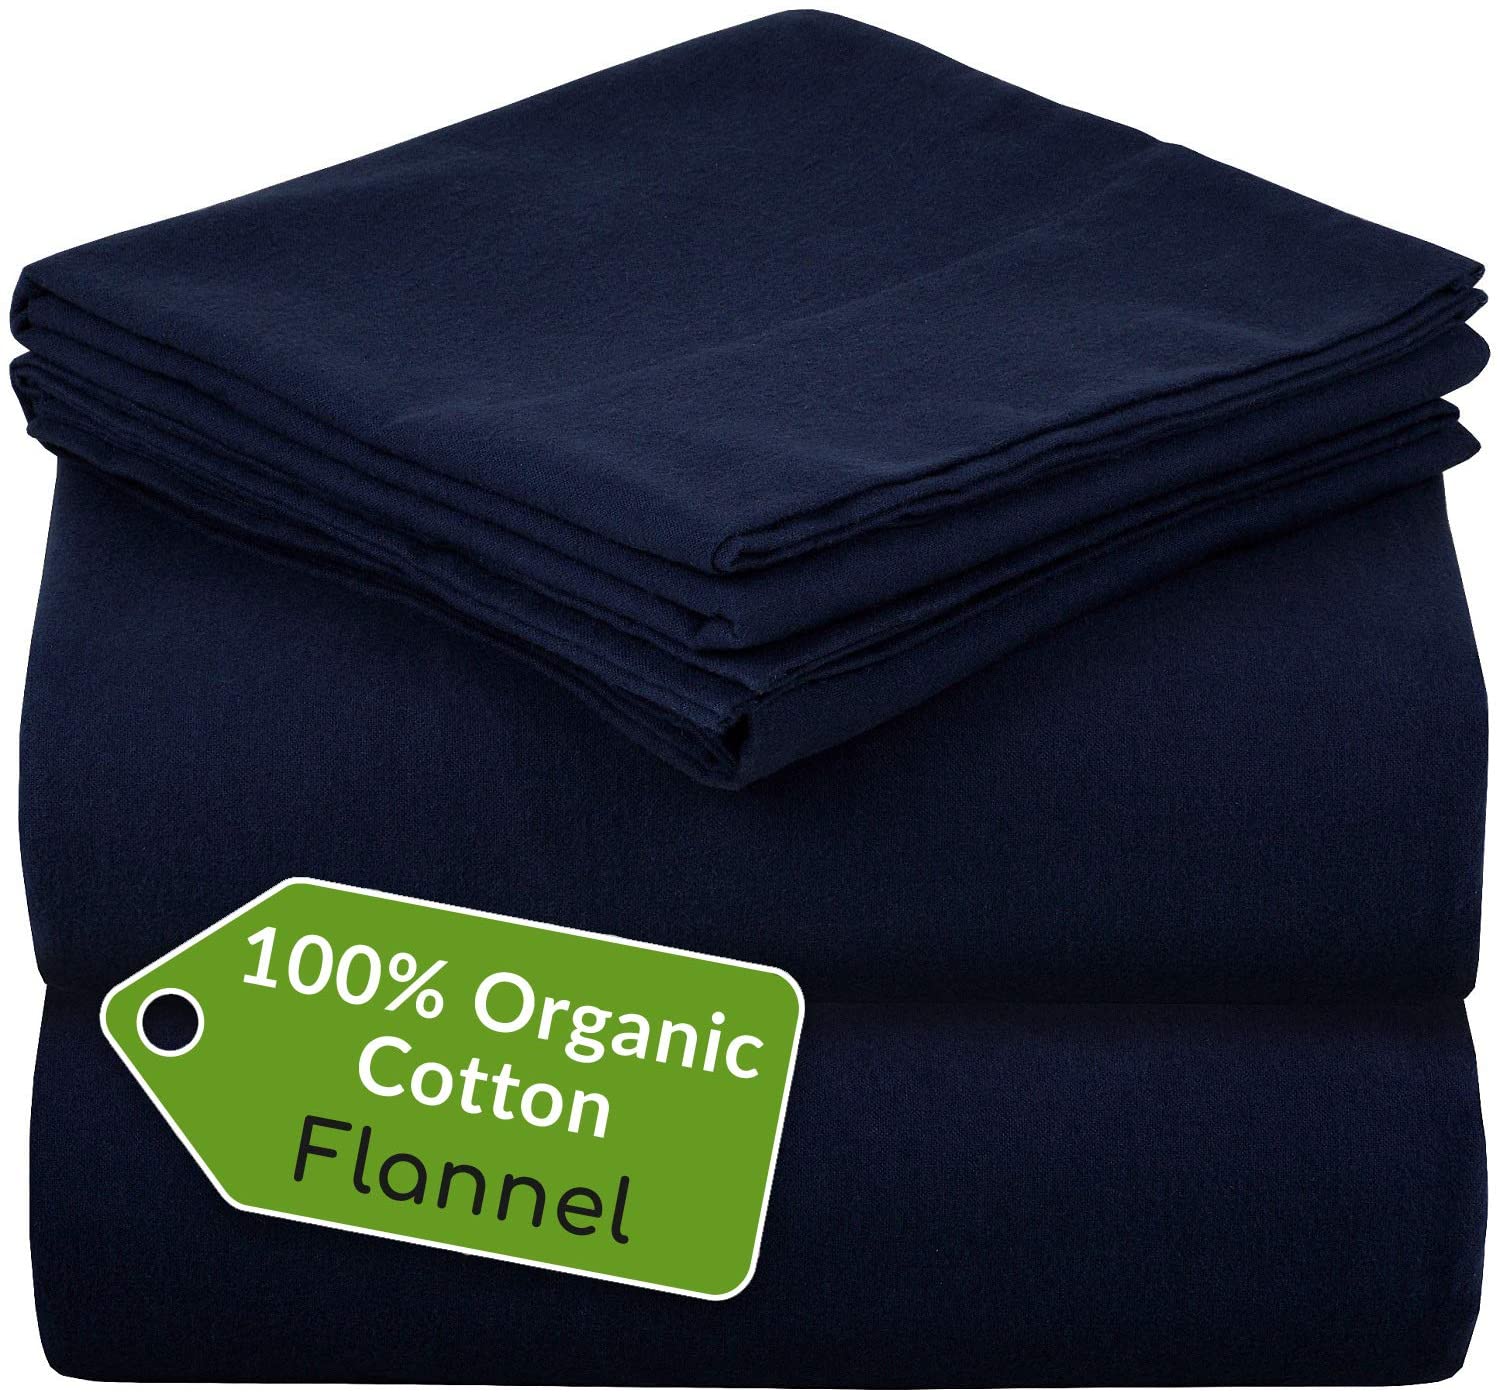 Mellanni Organic Breathable Cotton King-Size Flannel Sheets, 4-Piece